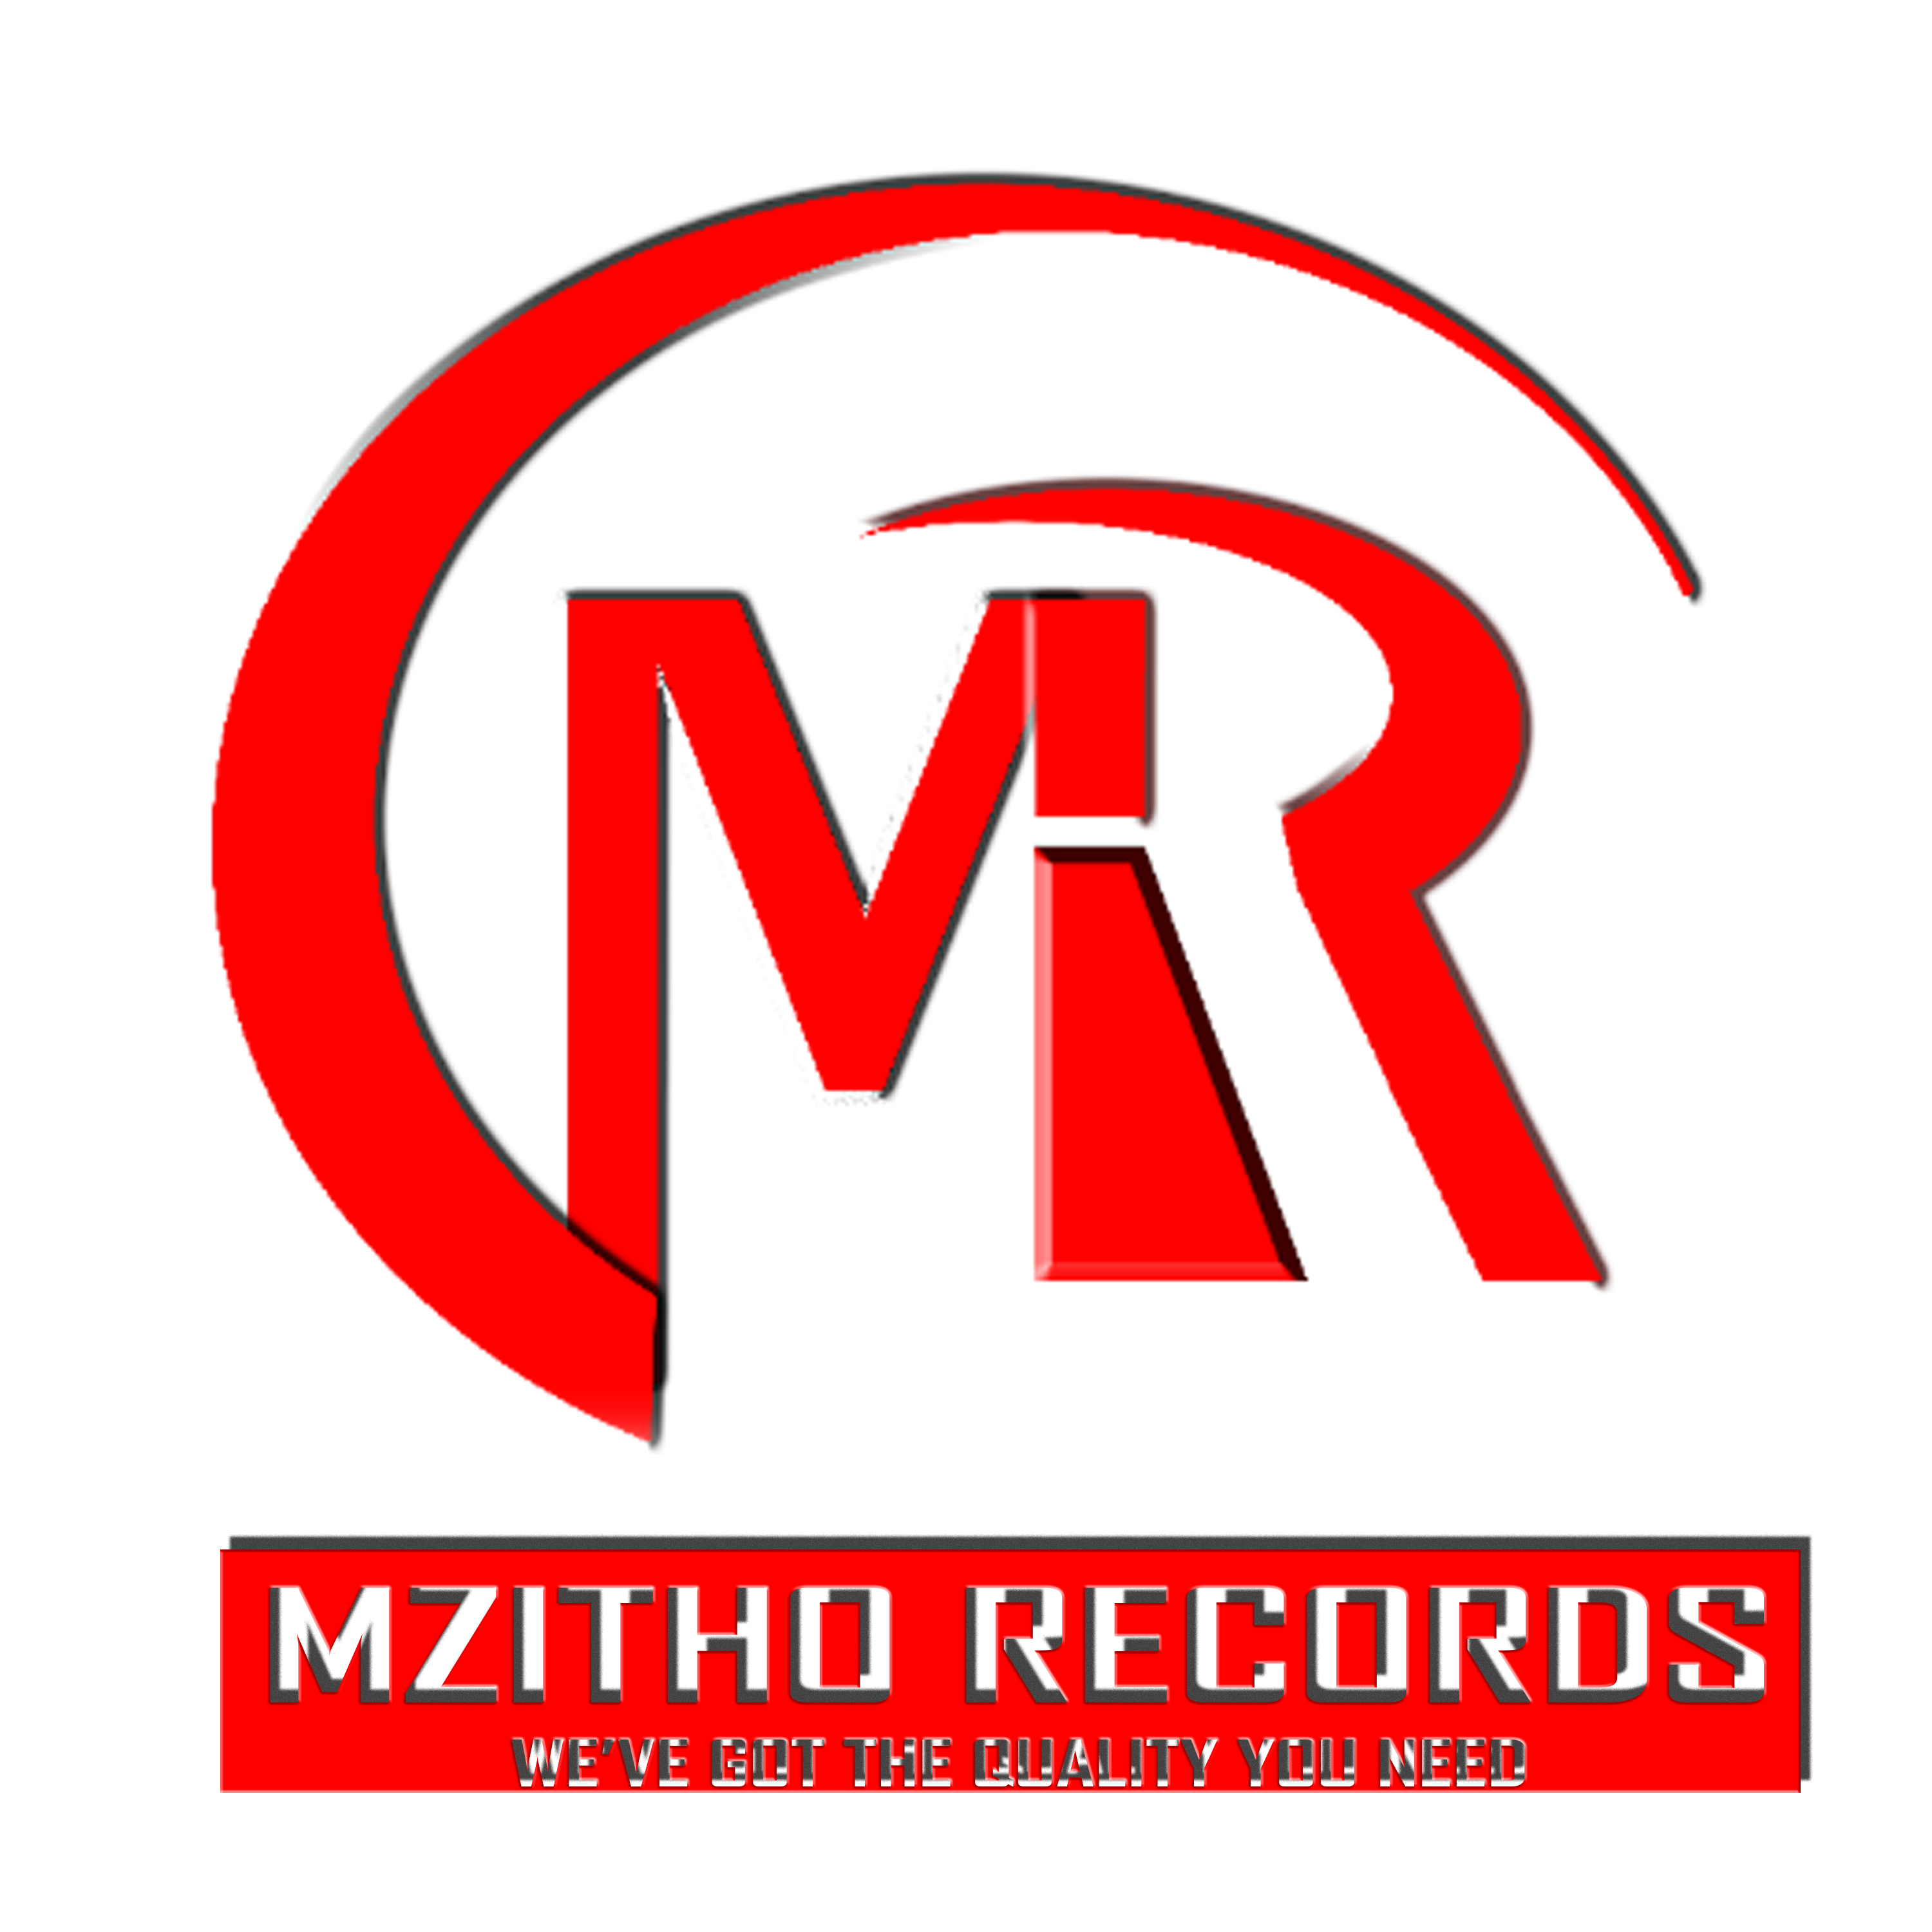 Mzitho Req is a youthful, energetic and visionary music record company established in 2006, at Limpopo Province in Rotterdam village. The dream to pursue music can be traced to the dusty village of Rotty.